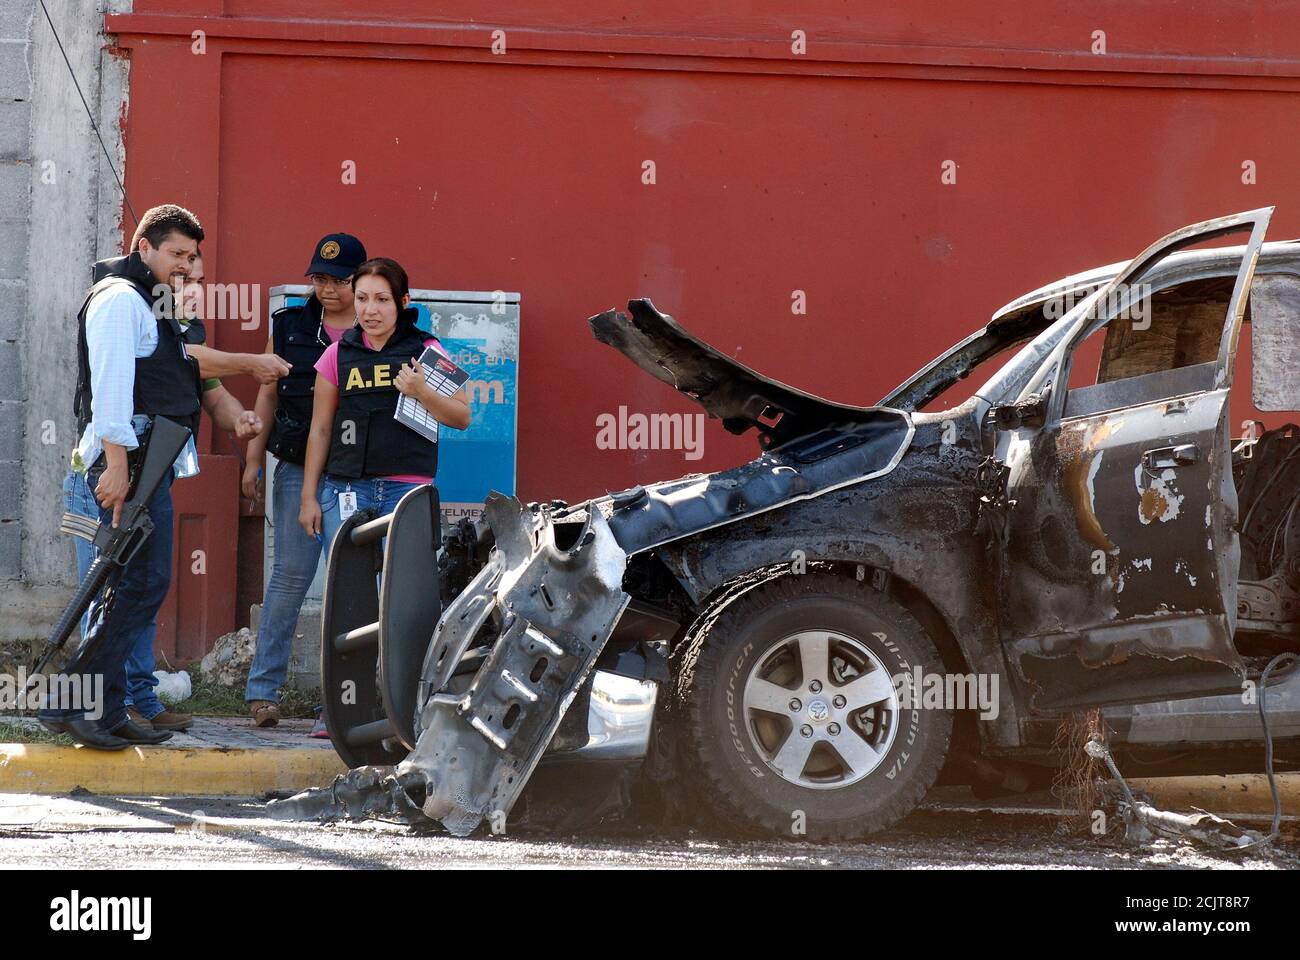 Police Detectives Talk Next To The Burnt Wreckage Of A Pickup Truck That Was Attacked In The Municipality Of Escobedo Neighbouring Monterrey July 27 2011 The Vehicle Assigned To The Bodyguards Of